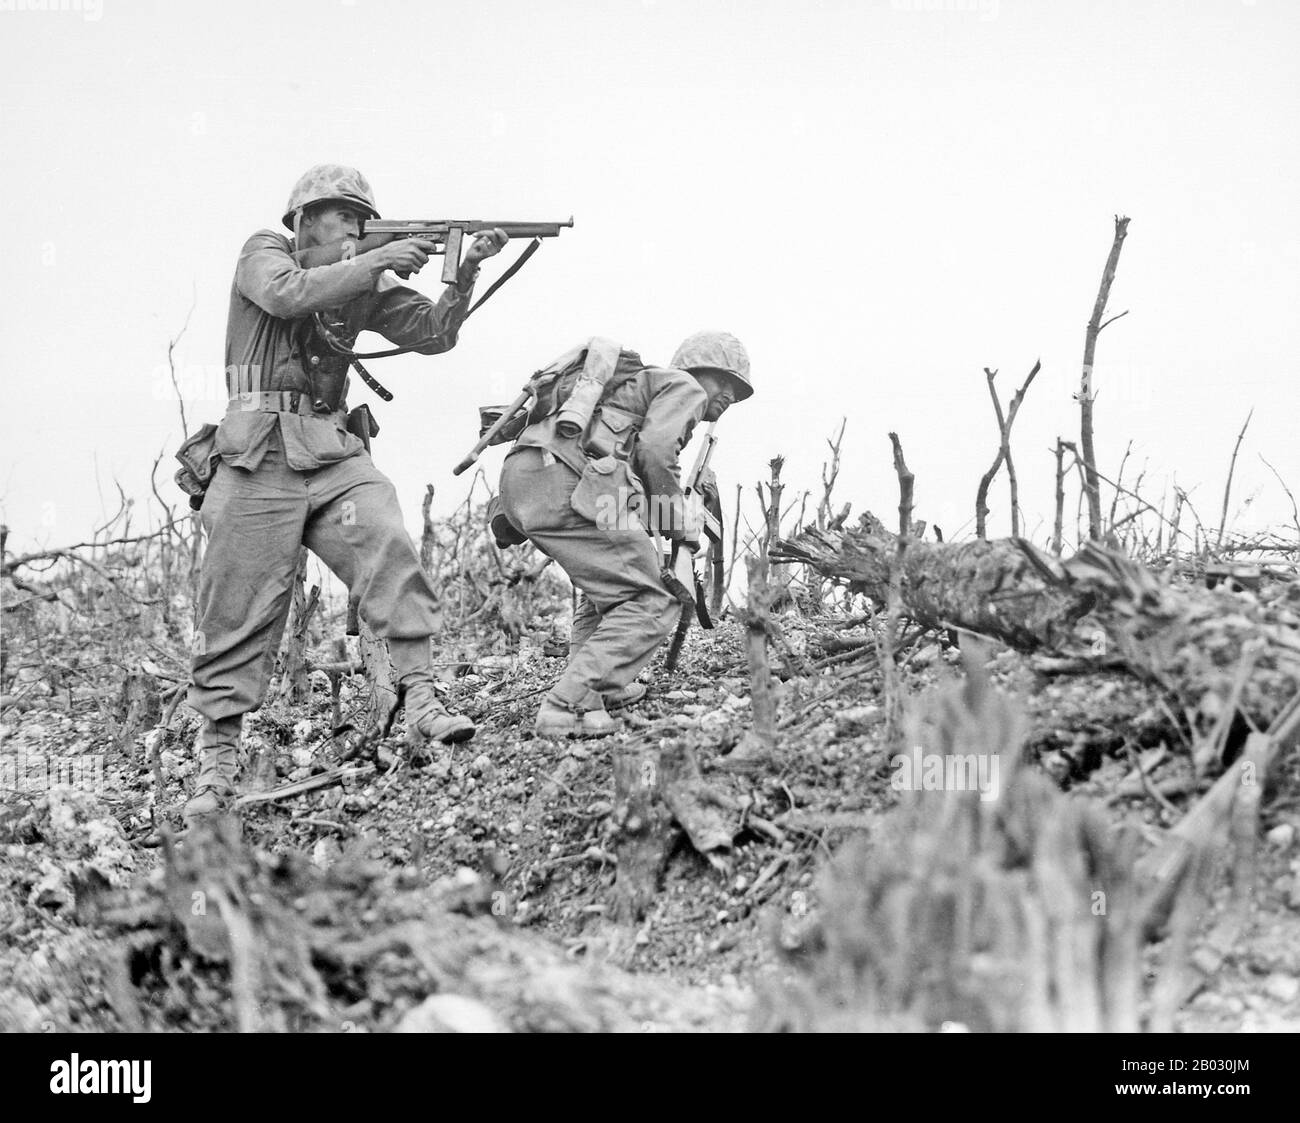 The Battle of Okinawa, codenamed Operation Iceberg, was a series of battles fought in the Ryukyu Islands, centered on the island of Okinawa, and included the largest amphibious assault in the Pacific War.The 82-day-long battle lasted from 1 April until 22 June 1945.  The Battle of Okinawa was remarkable for the ferocity of the fighting, the intensity of kamikaze attacks from the Japanese defenders, and the great number of Allied ships and armored vehicles that assaulted the island. The battle was one of the bloodiest in the Pacific. Stock Photo